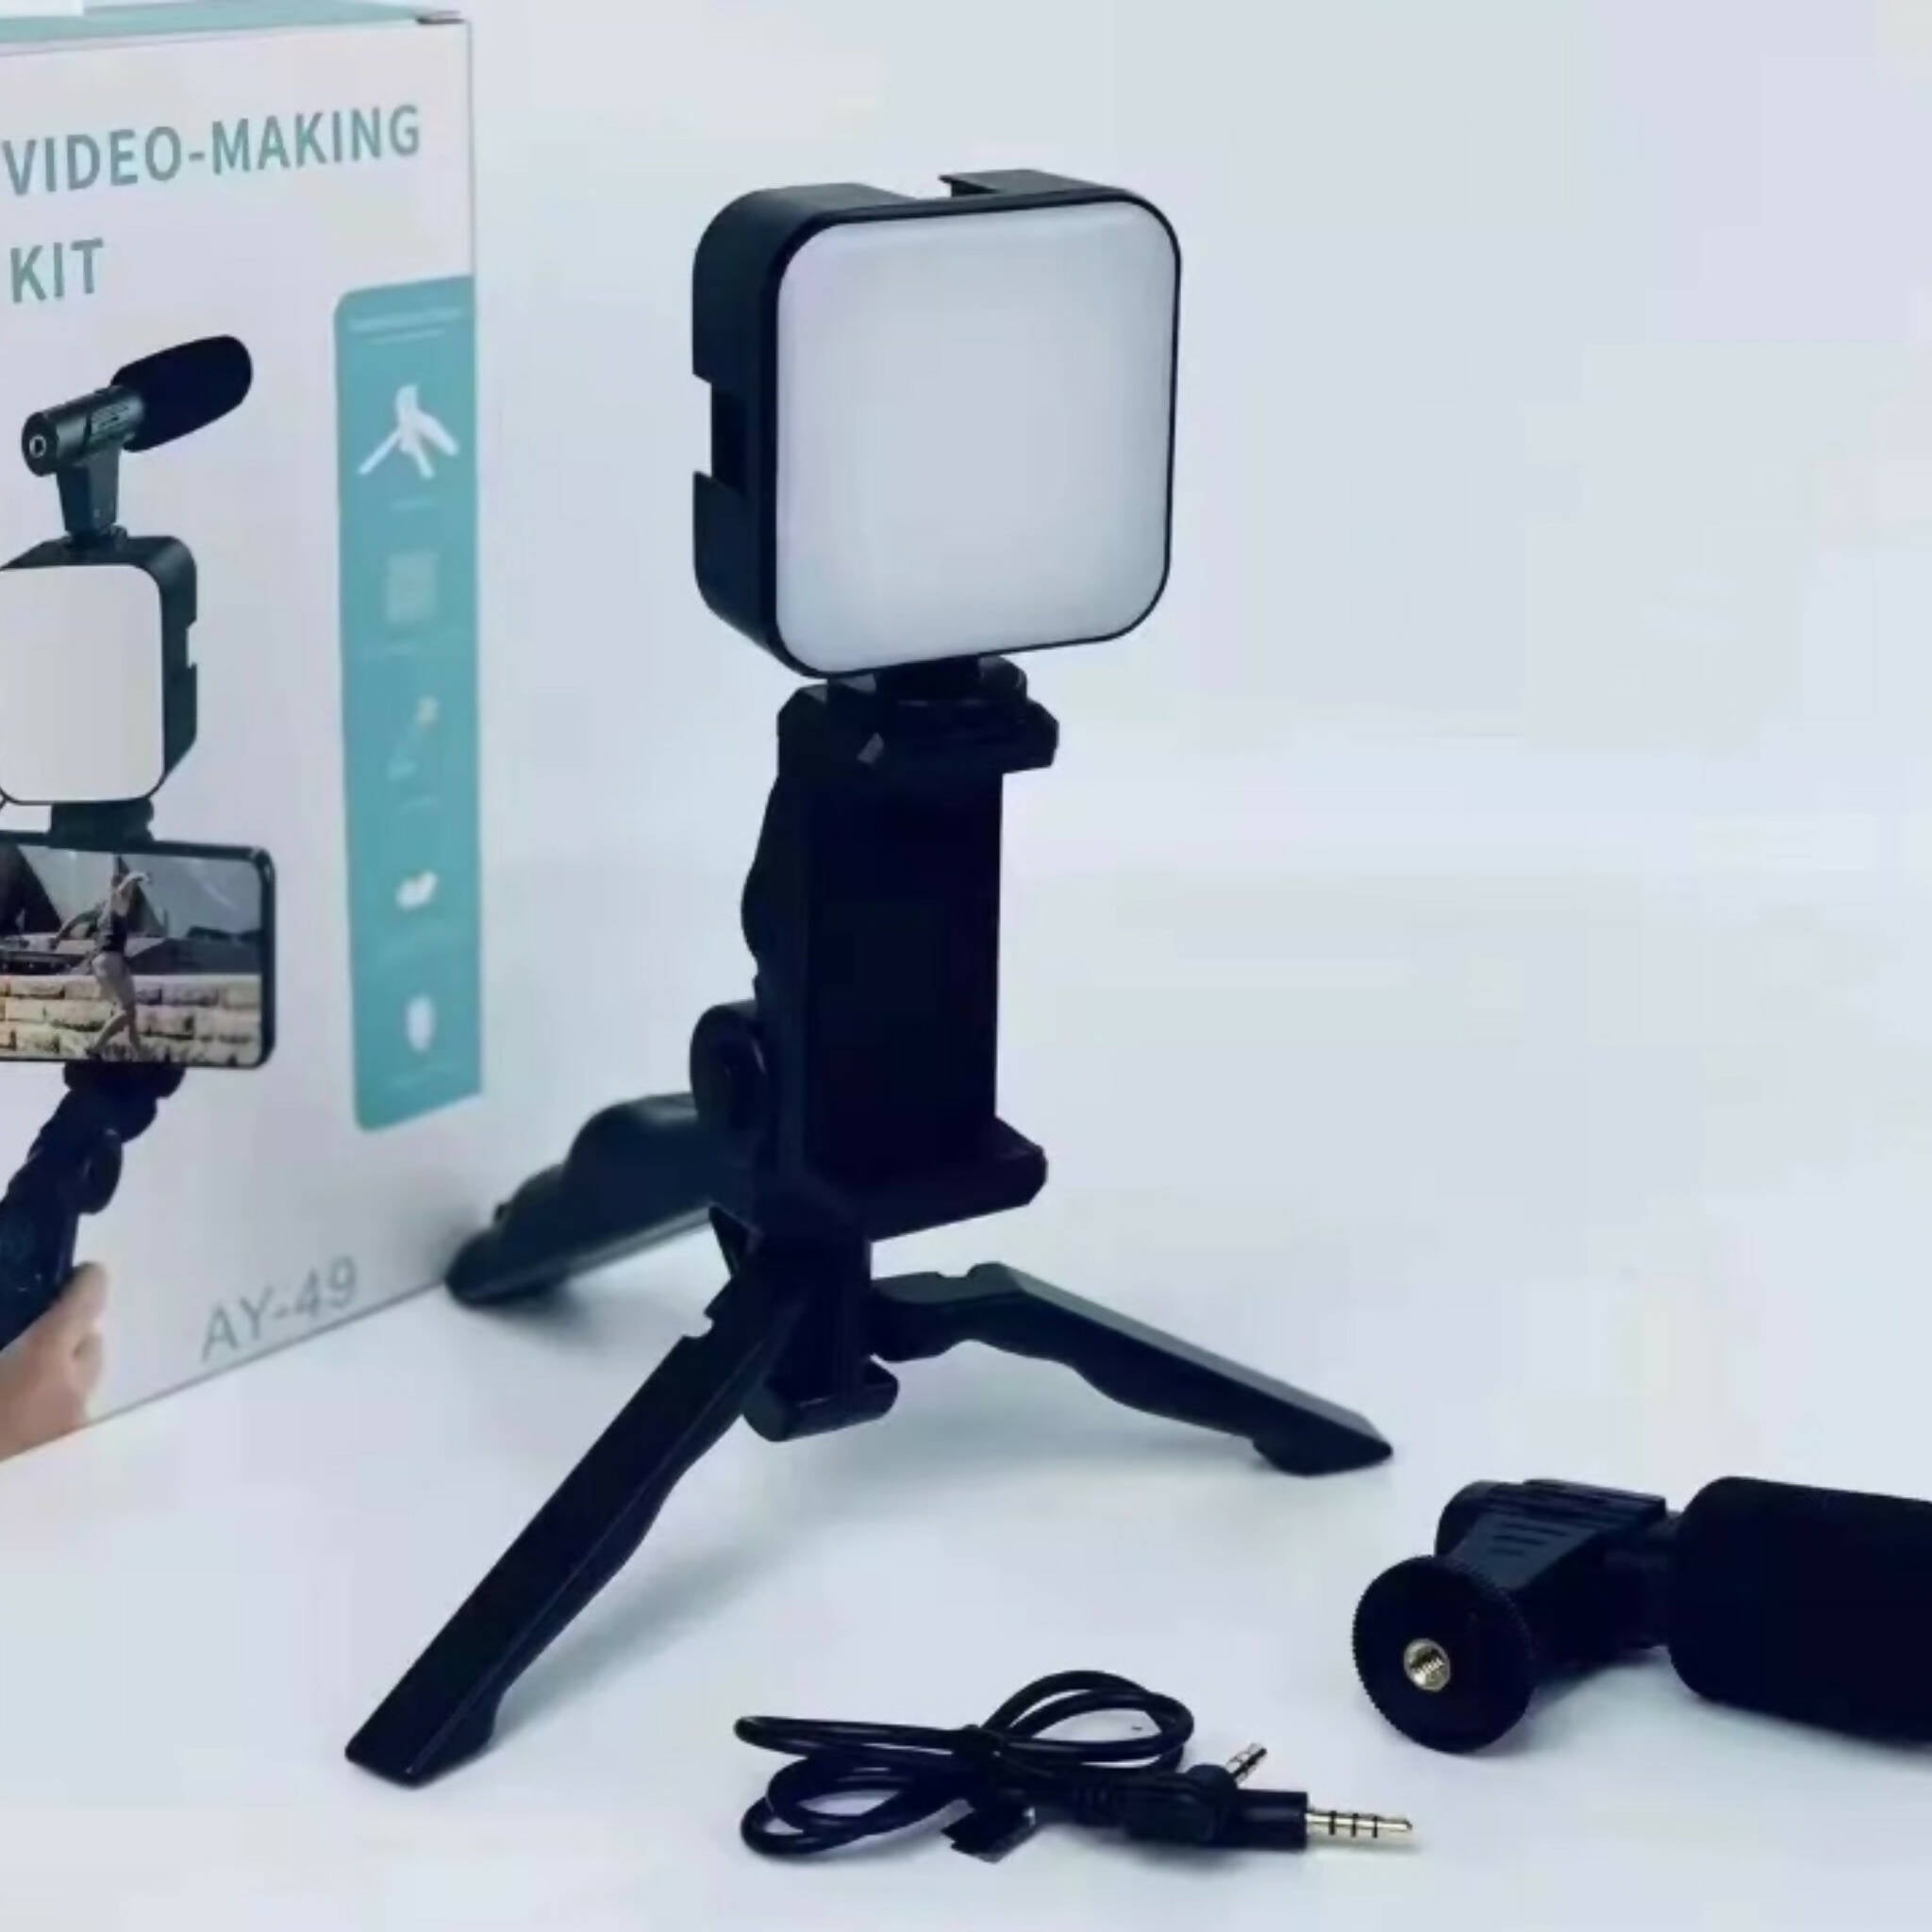 Vlogging Kit With Microphone, AY-49 Video Making